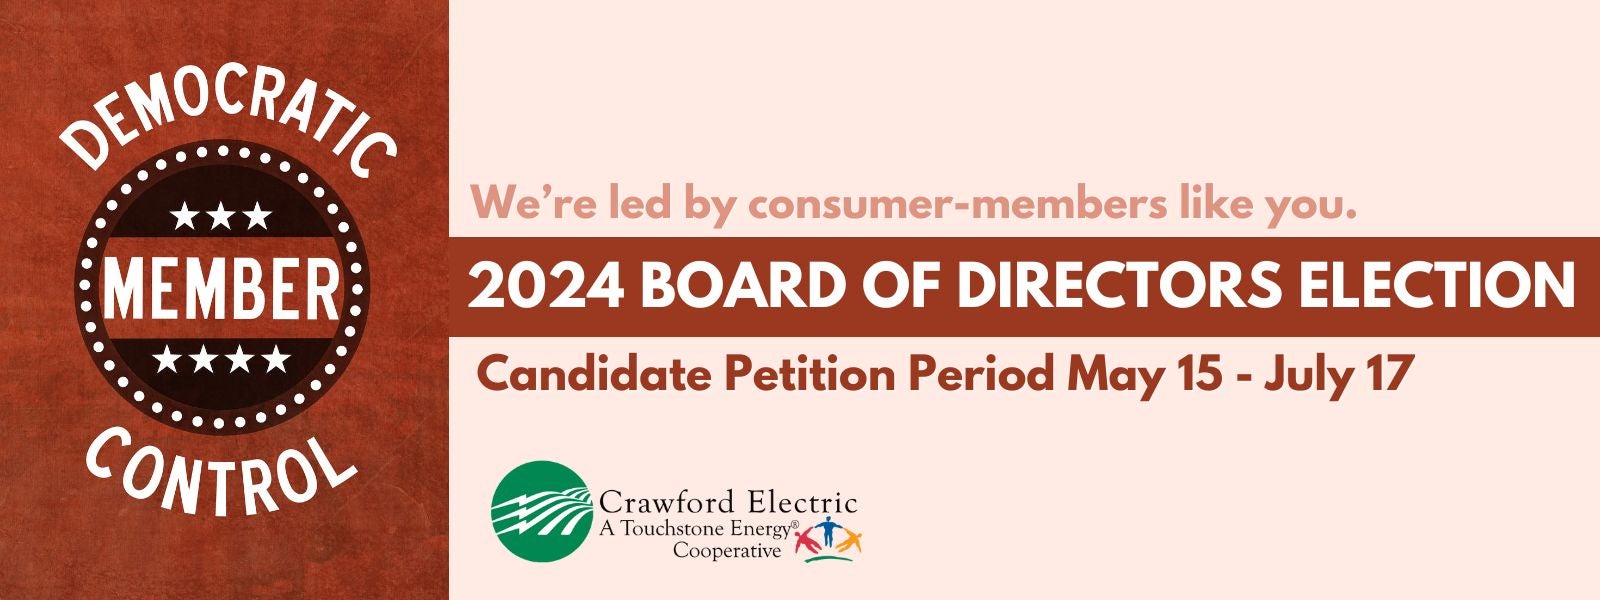 Board Candidate Petition Period May 15-July 17